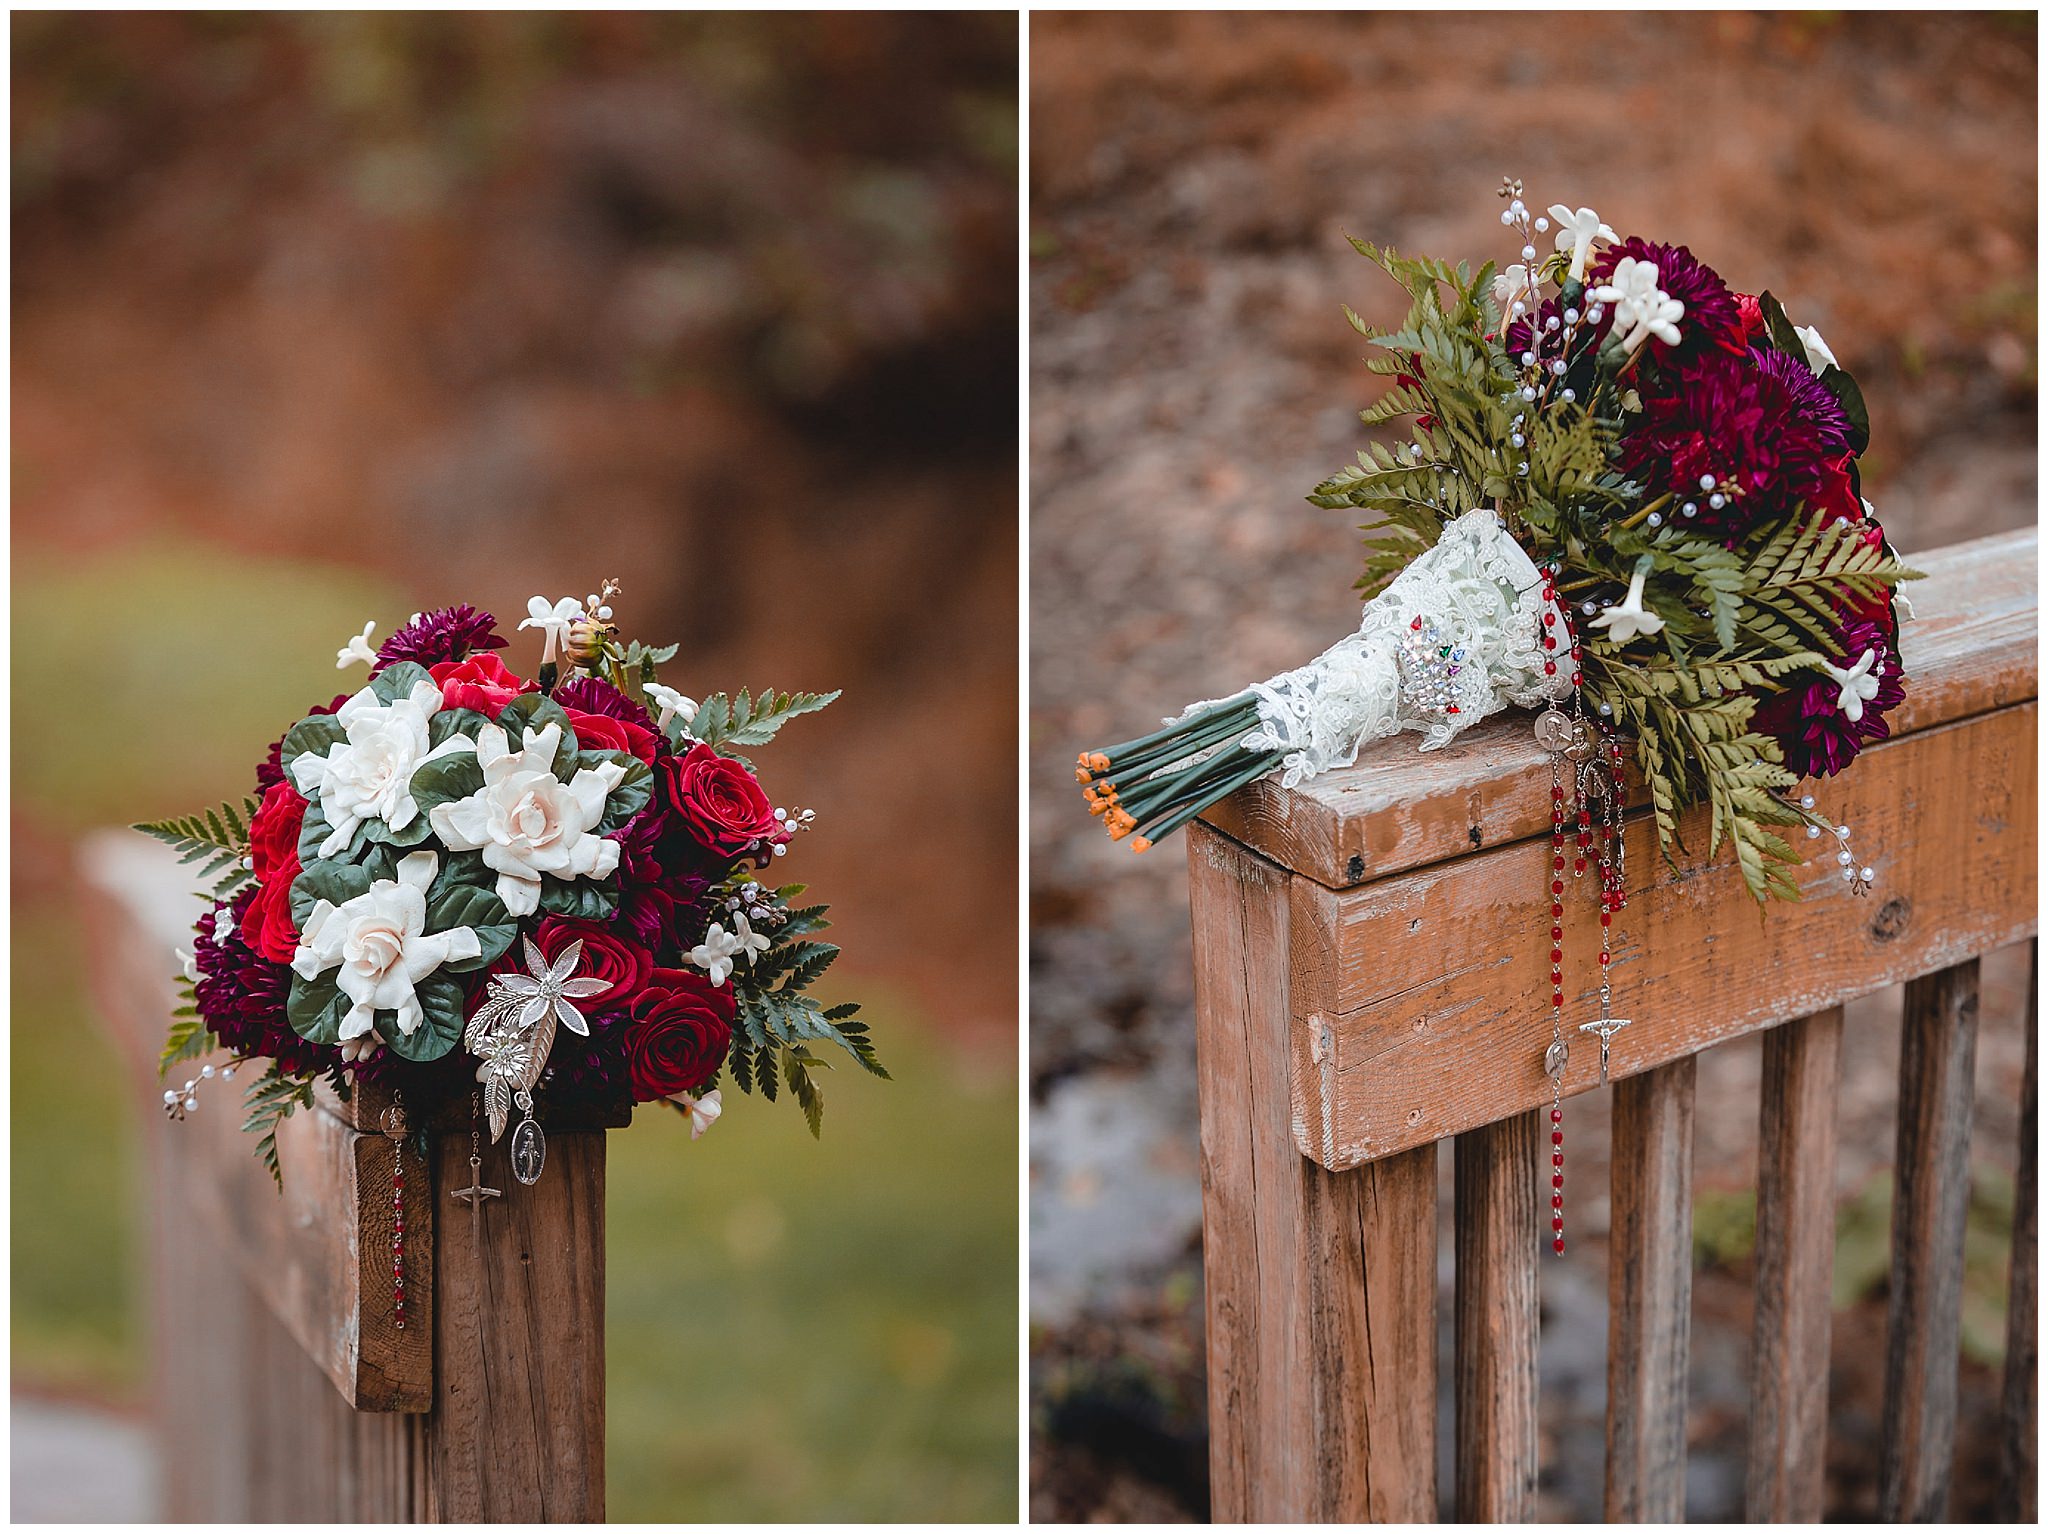 Bride's bouquet of white, red, and burgundy flowers with personal items hanging from the base